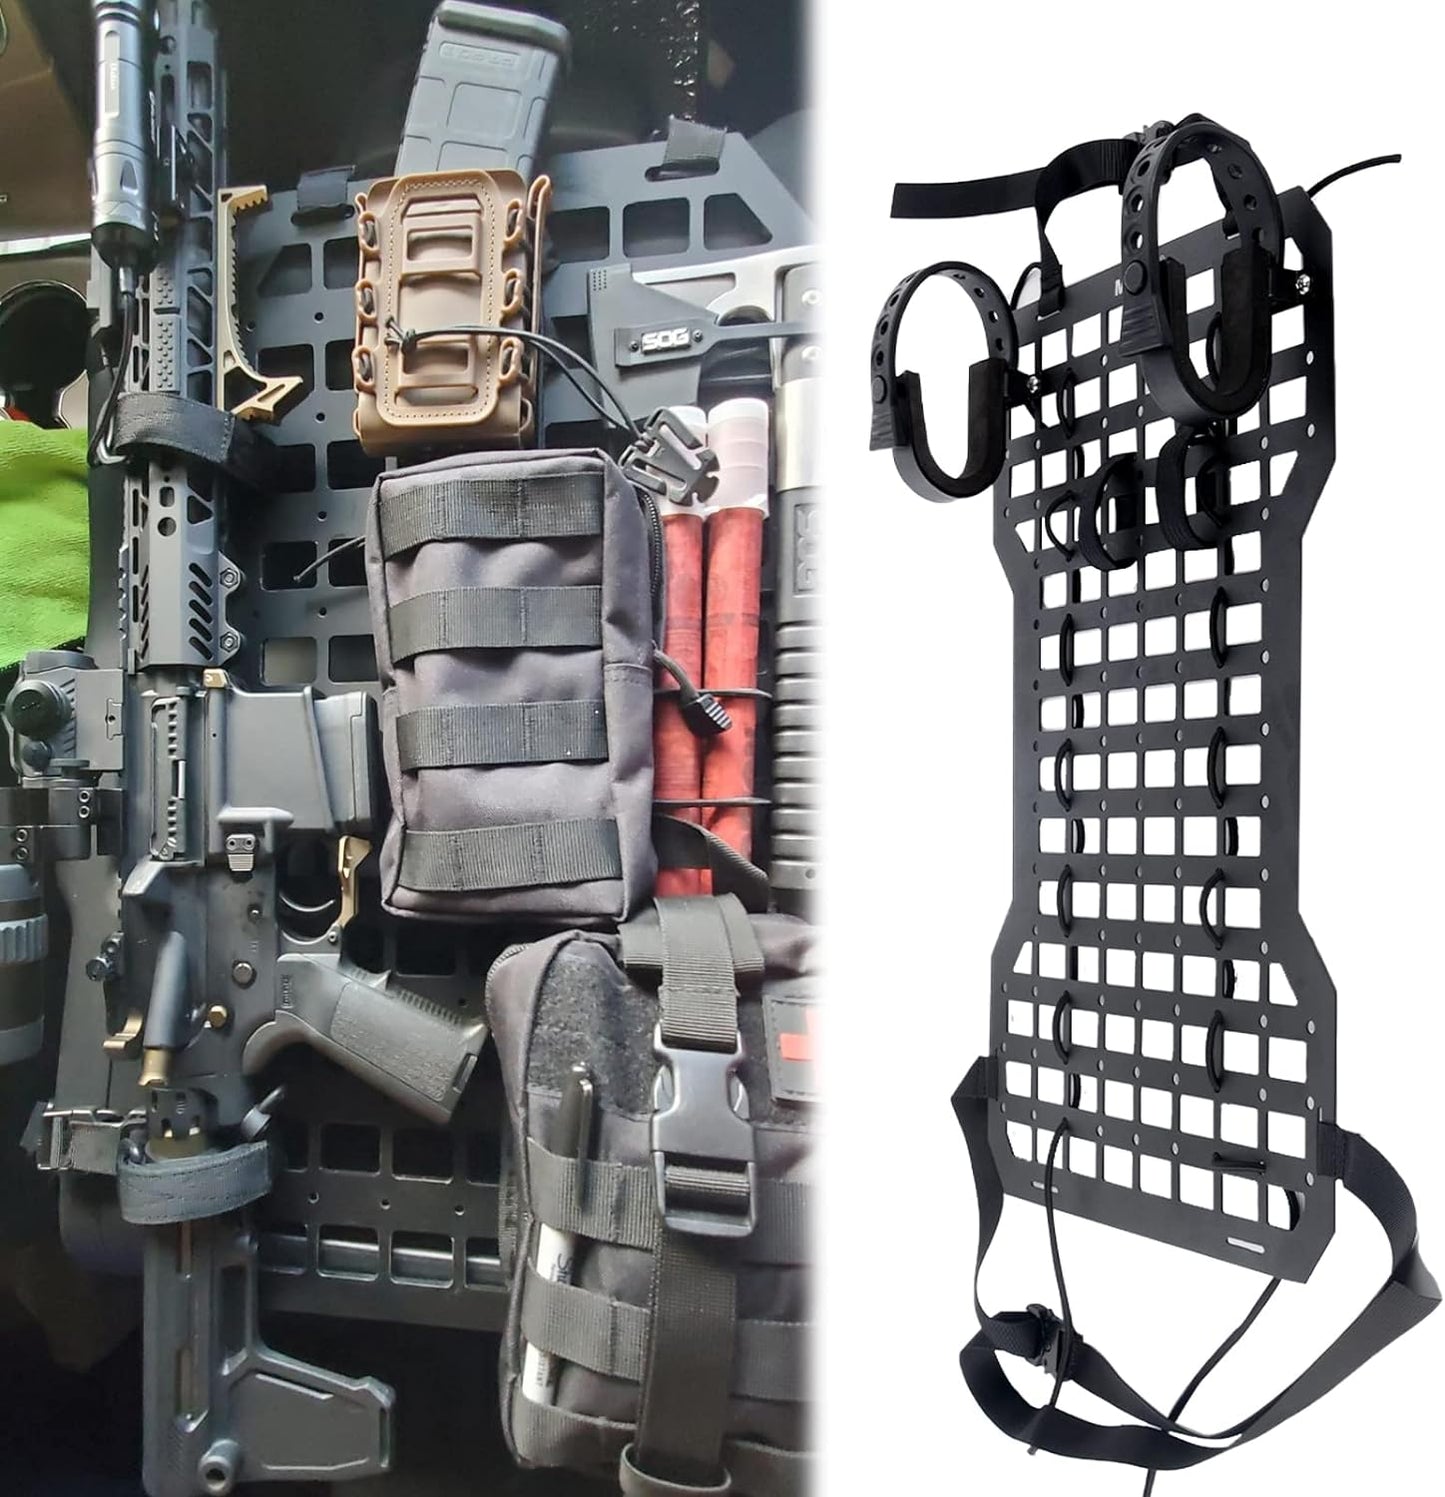 Tactical Rigid Molle Insert Panels for Vehicles Car Seat Back Organizer